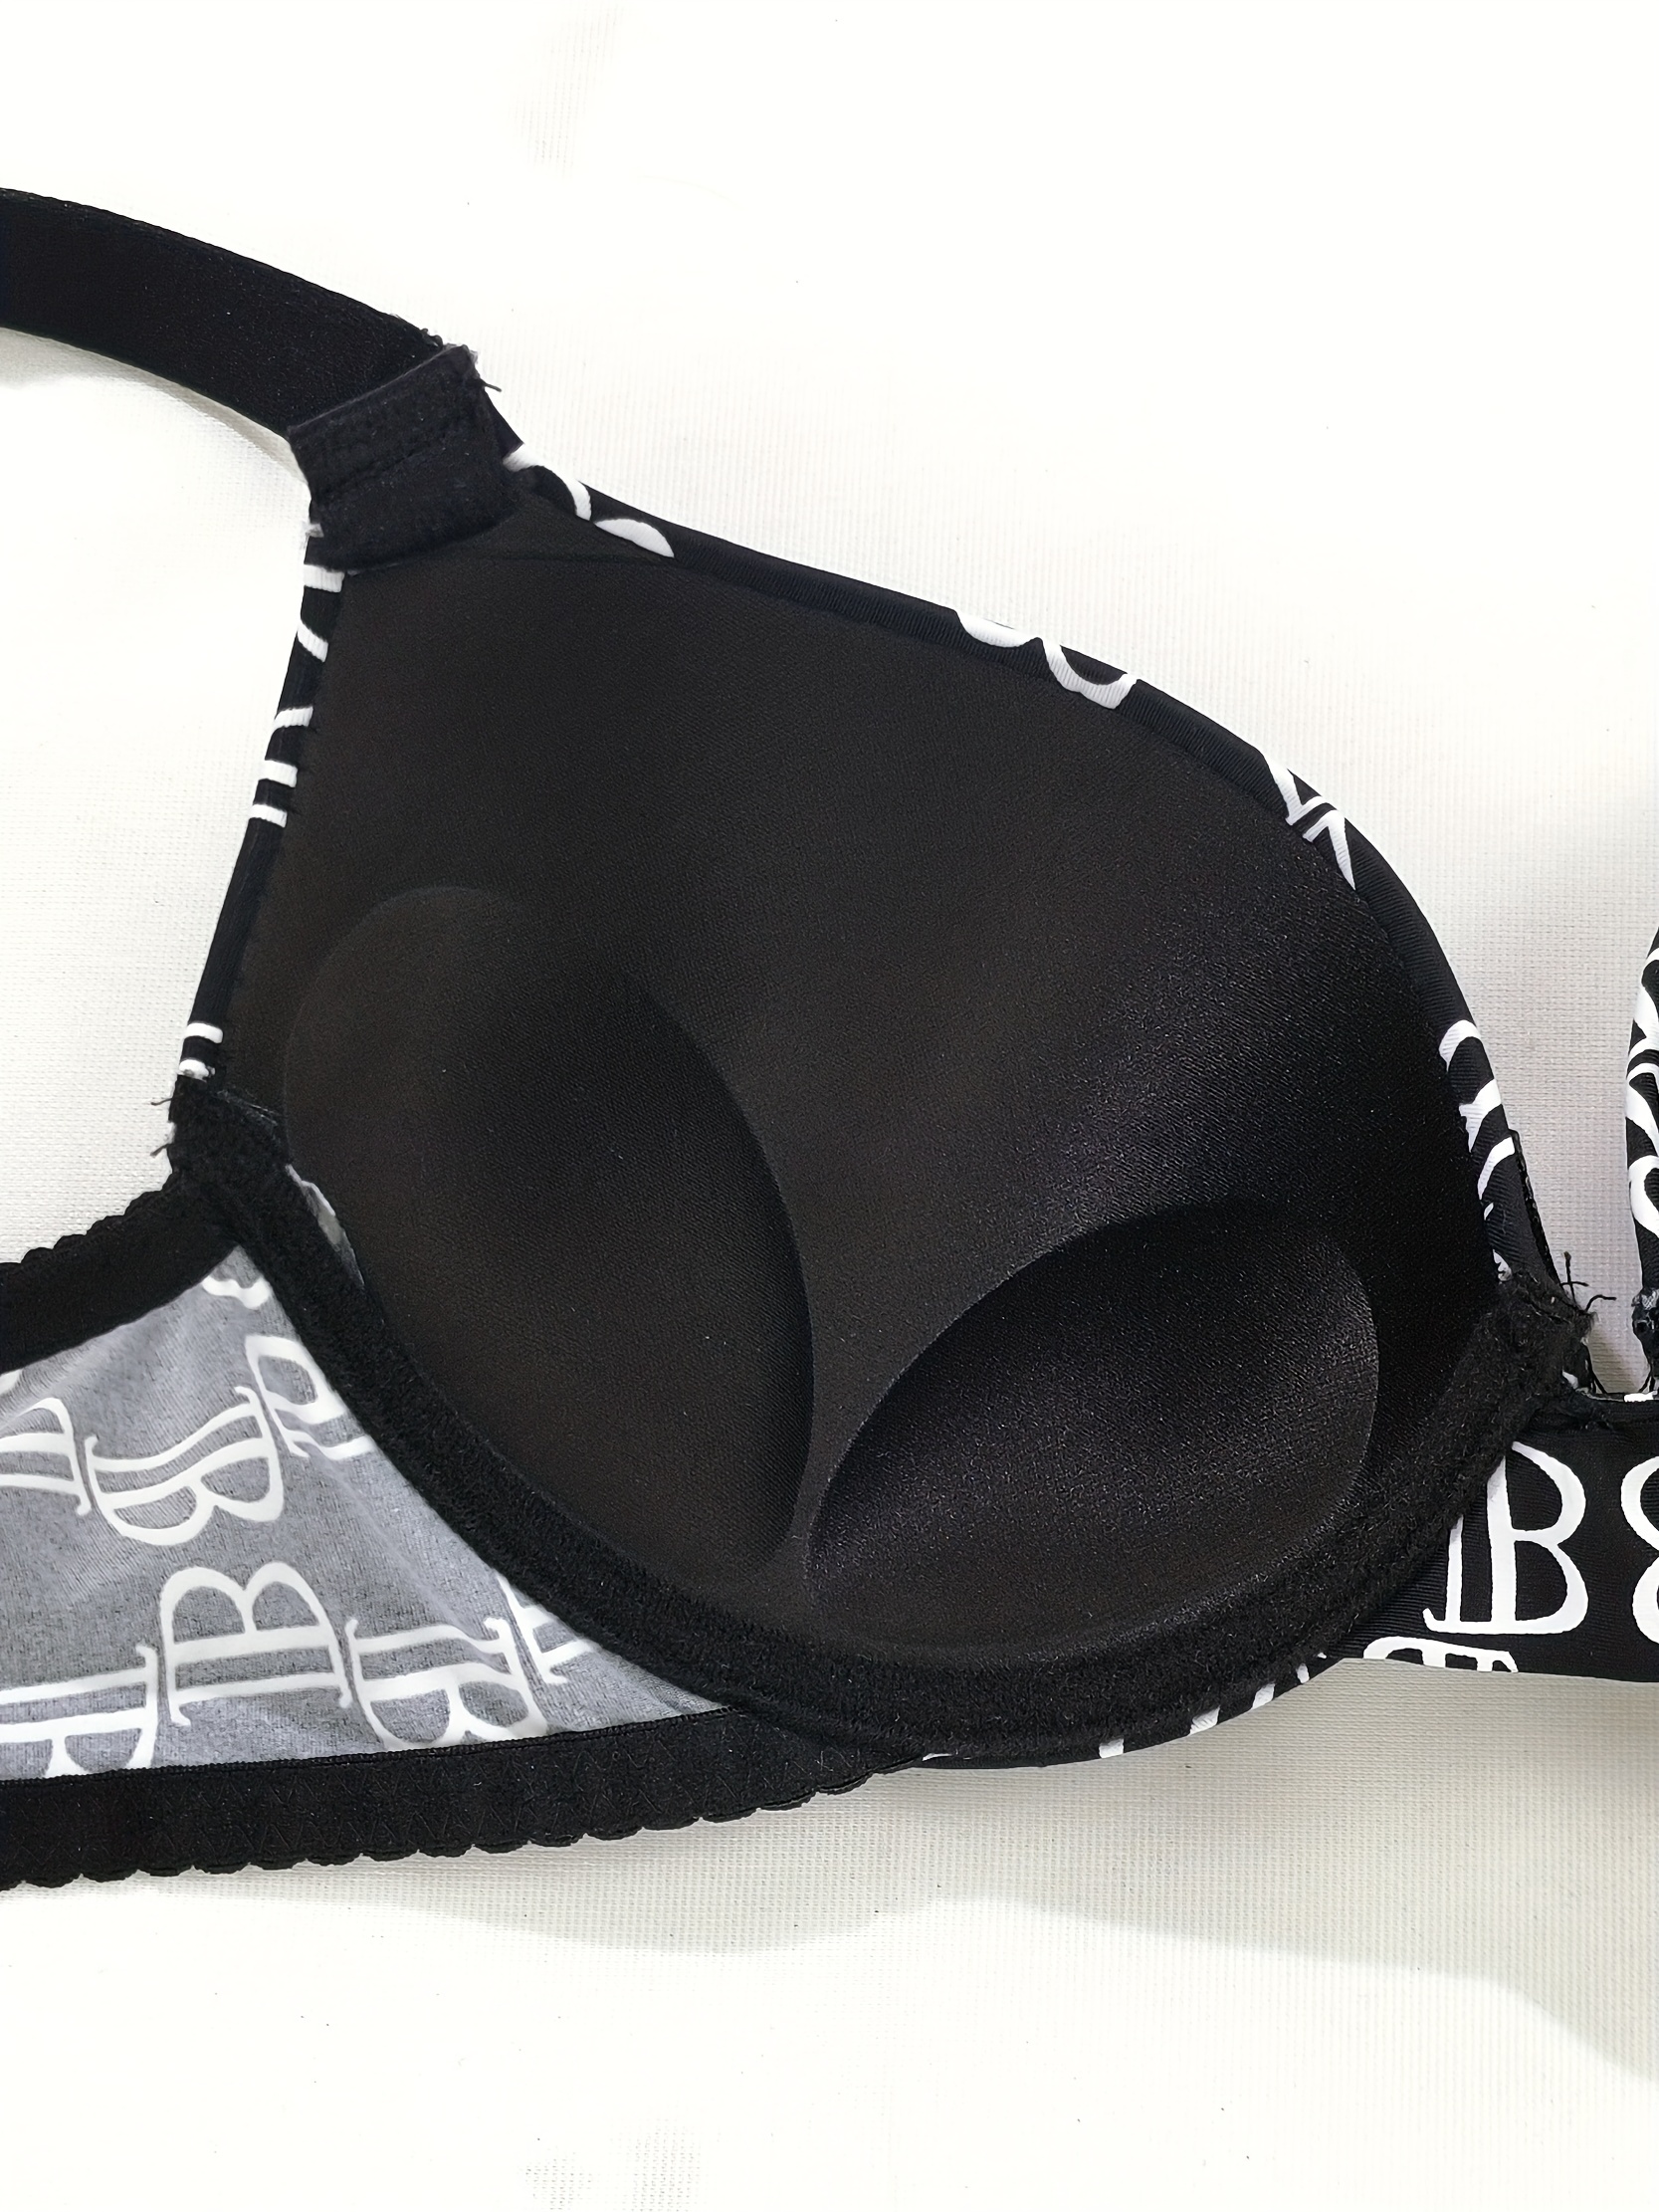 Buy online Black Printed Push Up Bra from lingerie for Women by